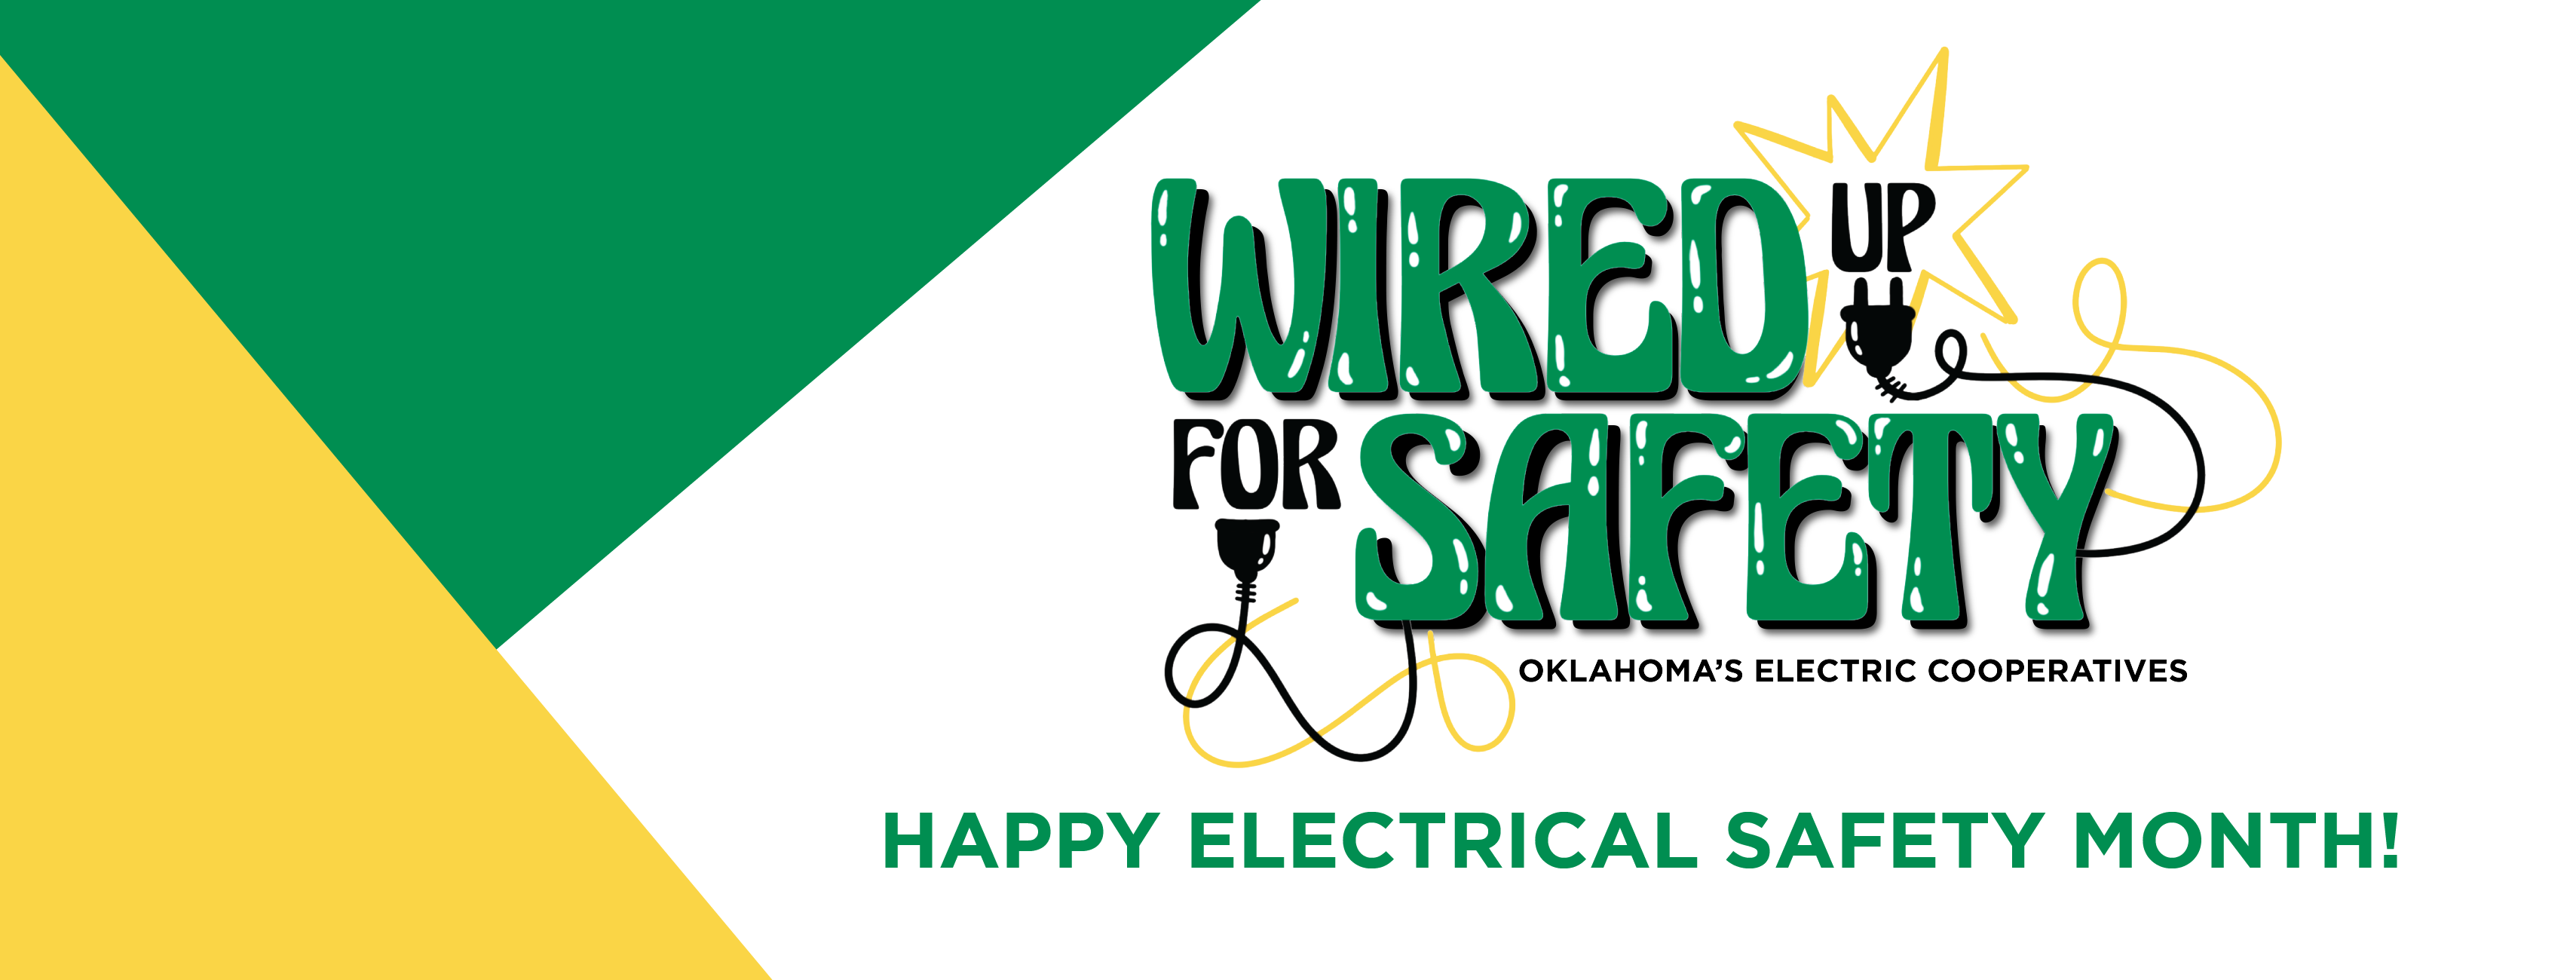 Wired Up For Safety! Happy Electrical Safety Month!